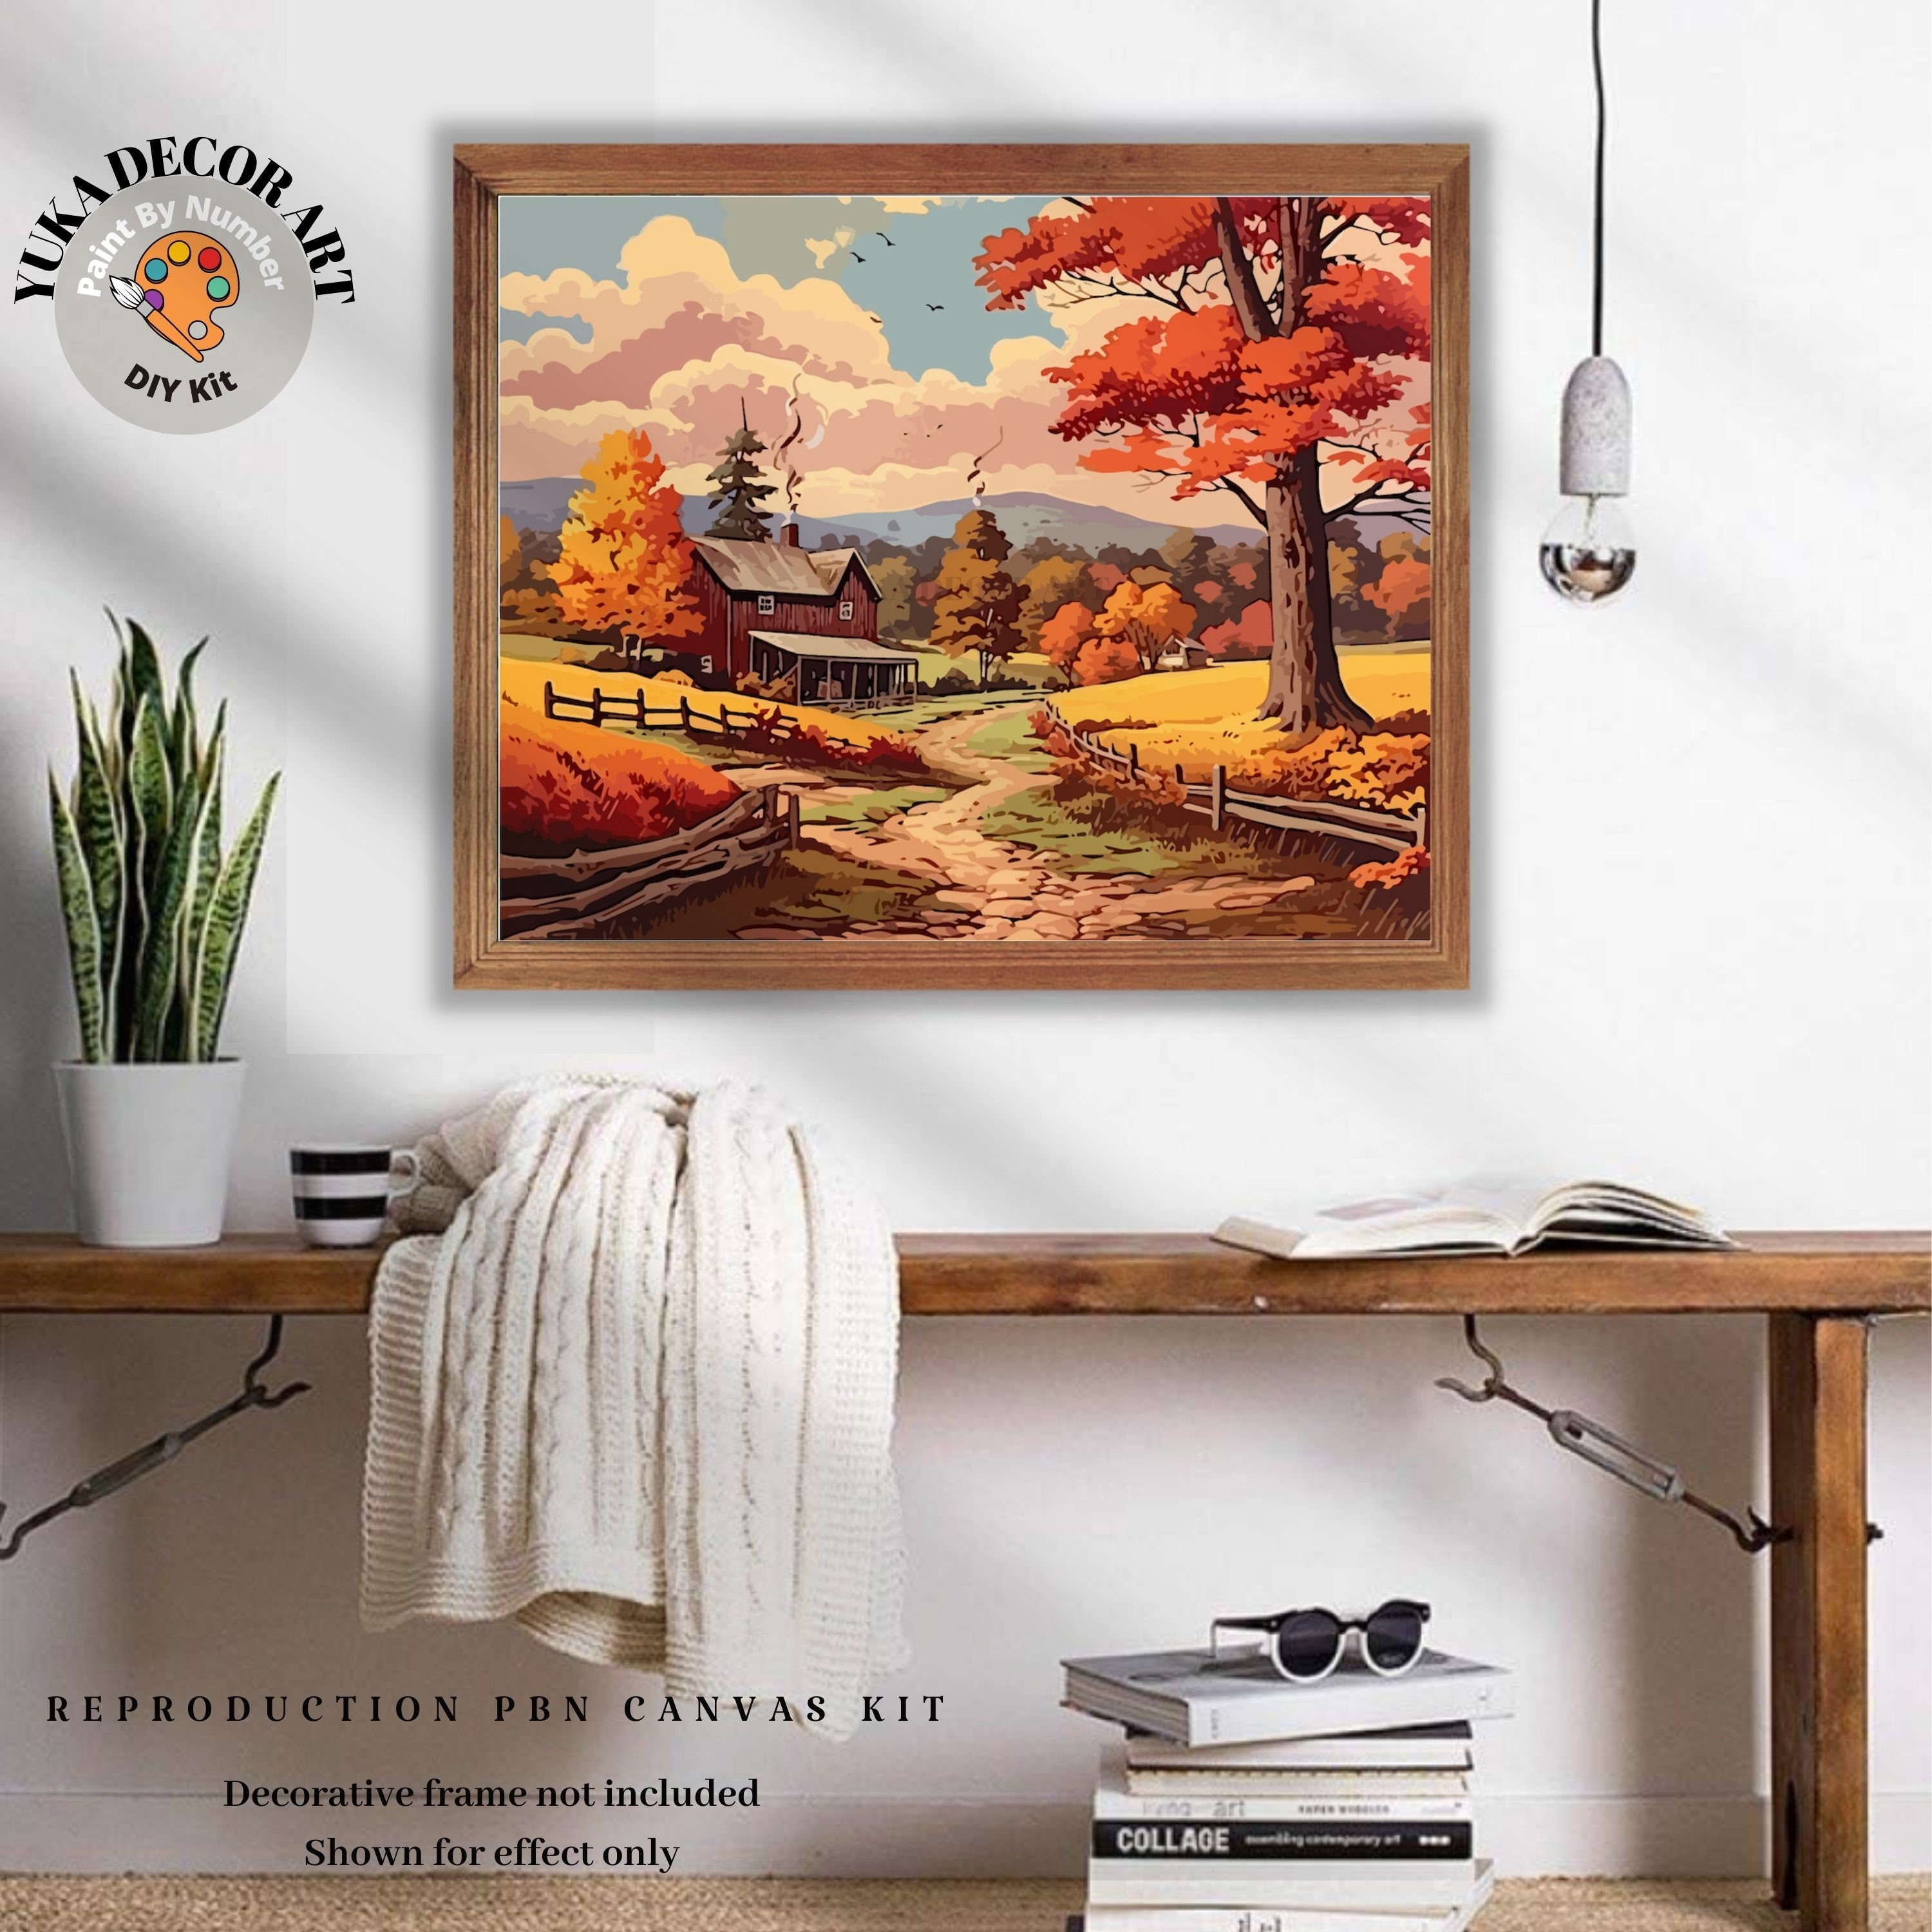 Countryside PAINT by NUMBER Kit for Adult , DIY Nature Vintage Style Art ,  Easy Beginner Acrylic Painting Kit,vintage Decor Gift 